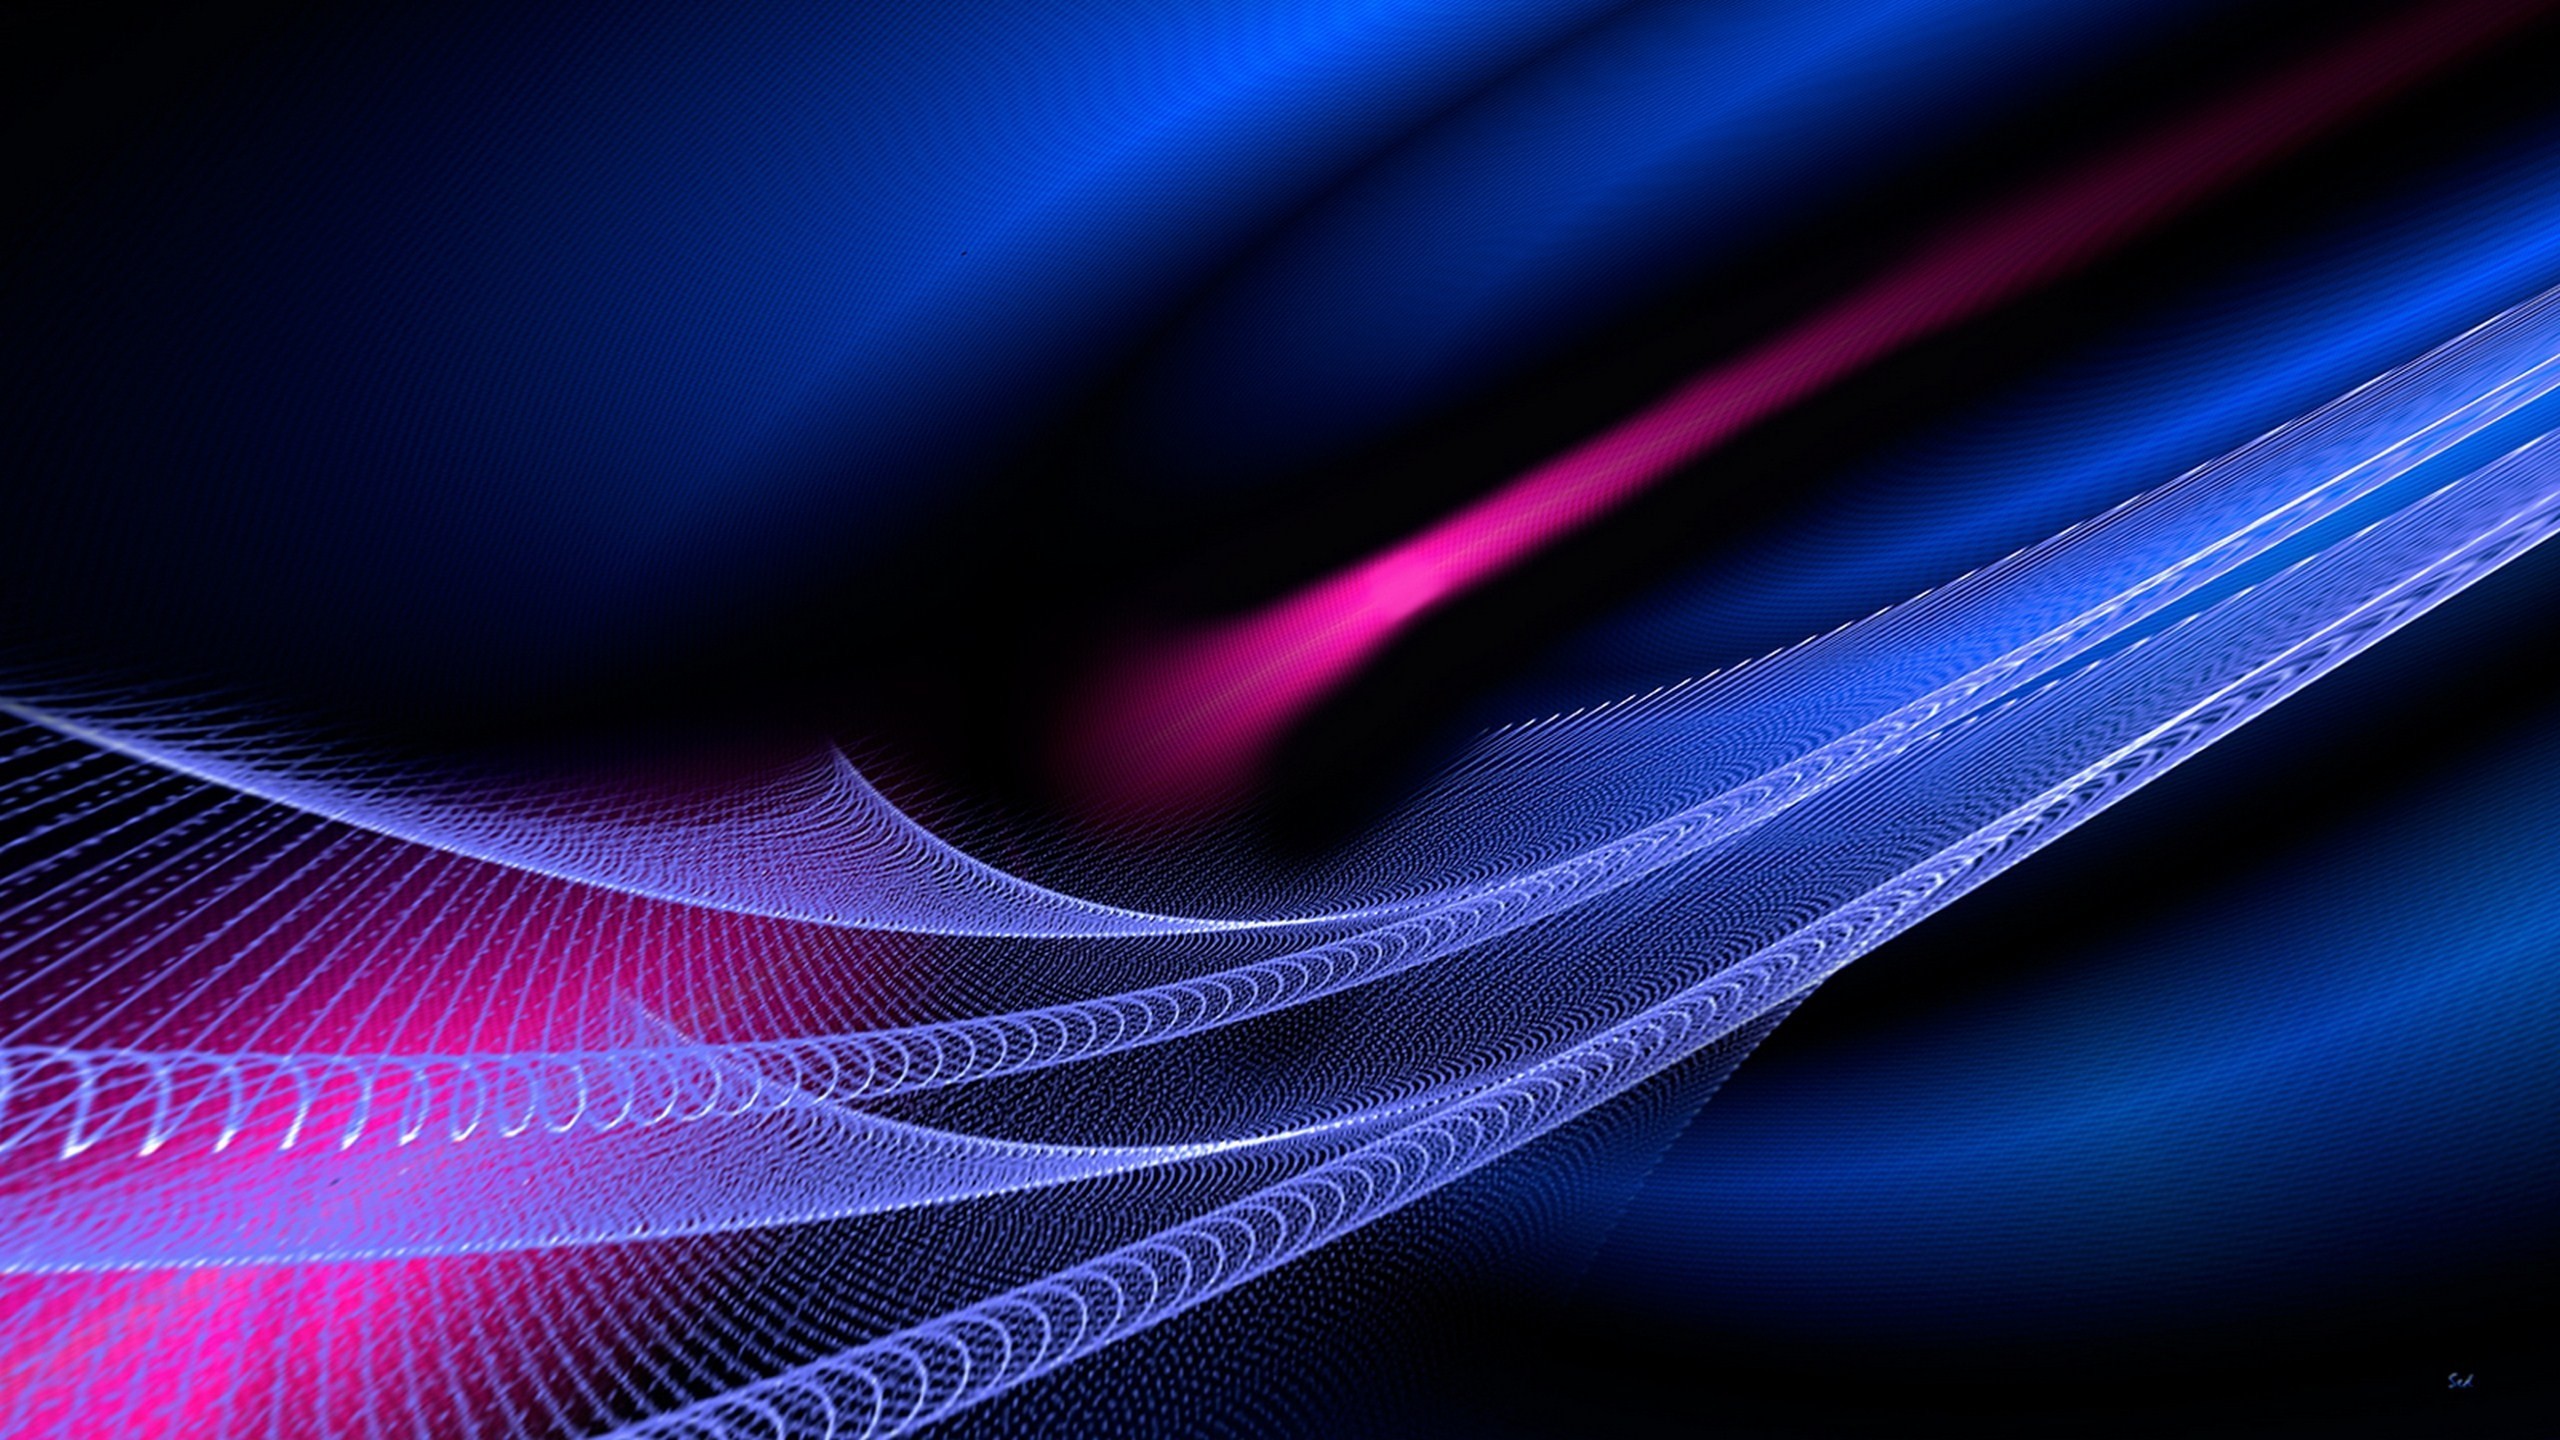 2560x1440 electromagnetic wallpaper - Google Search Â· Background ColourAbstract ...